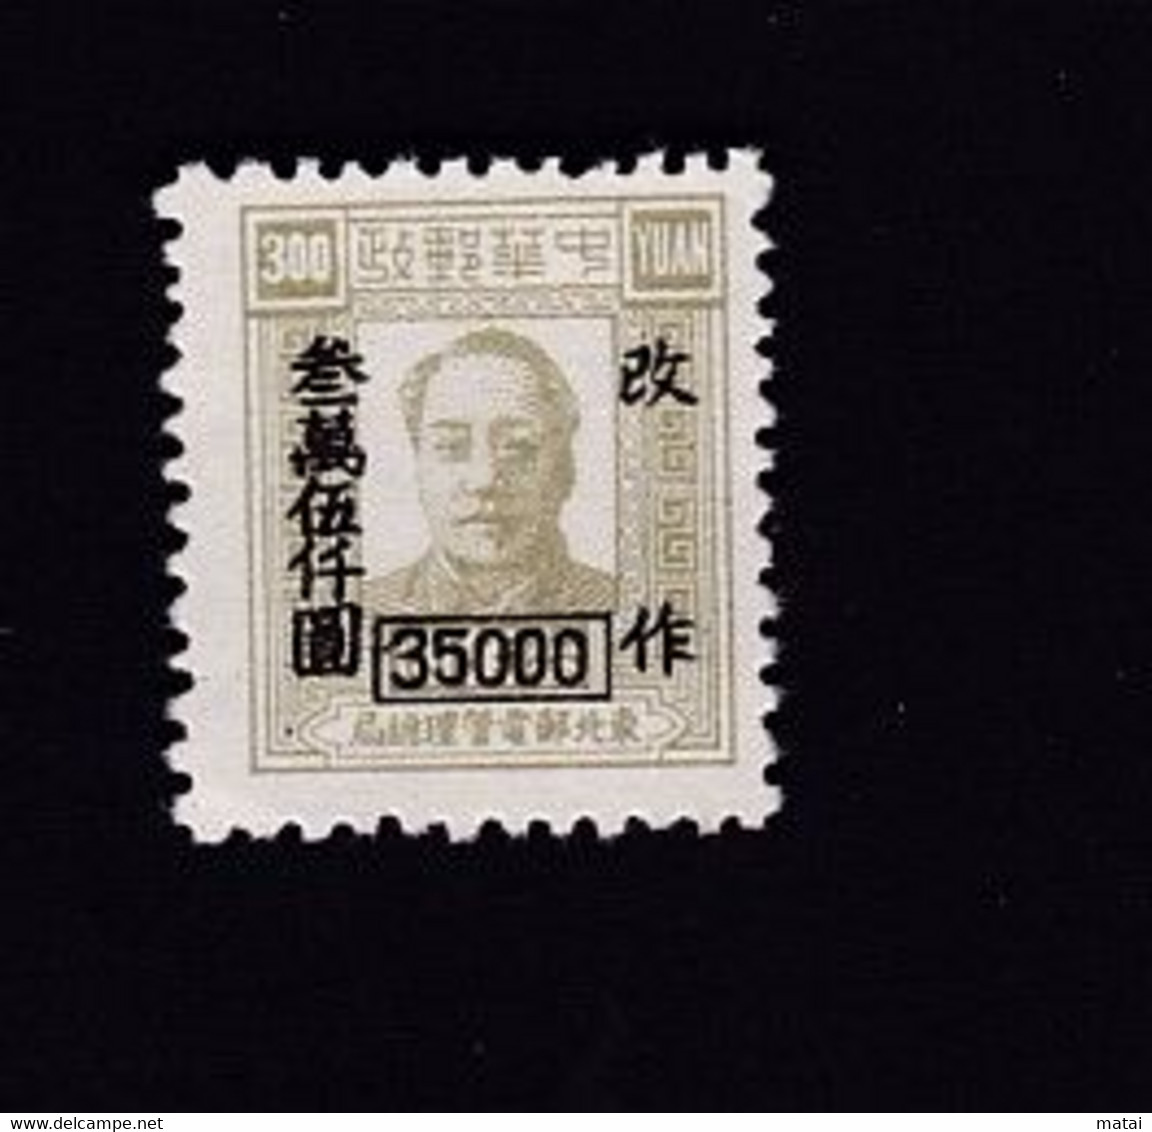 CHINA CINE CINA  THE CHINESE PEOPLE'S REVOLUTIONARY WAR PERIOD NORTHEAST PEOPLE'S POSTS STAMP - Zentralchina 1948-49